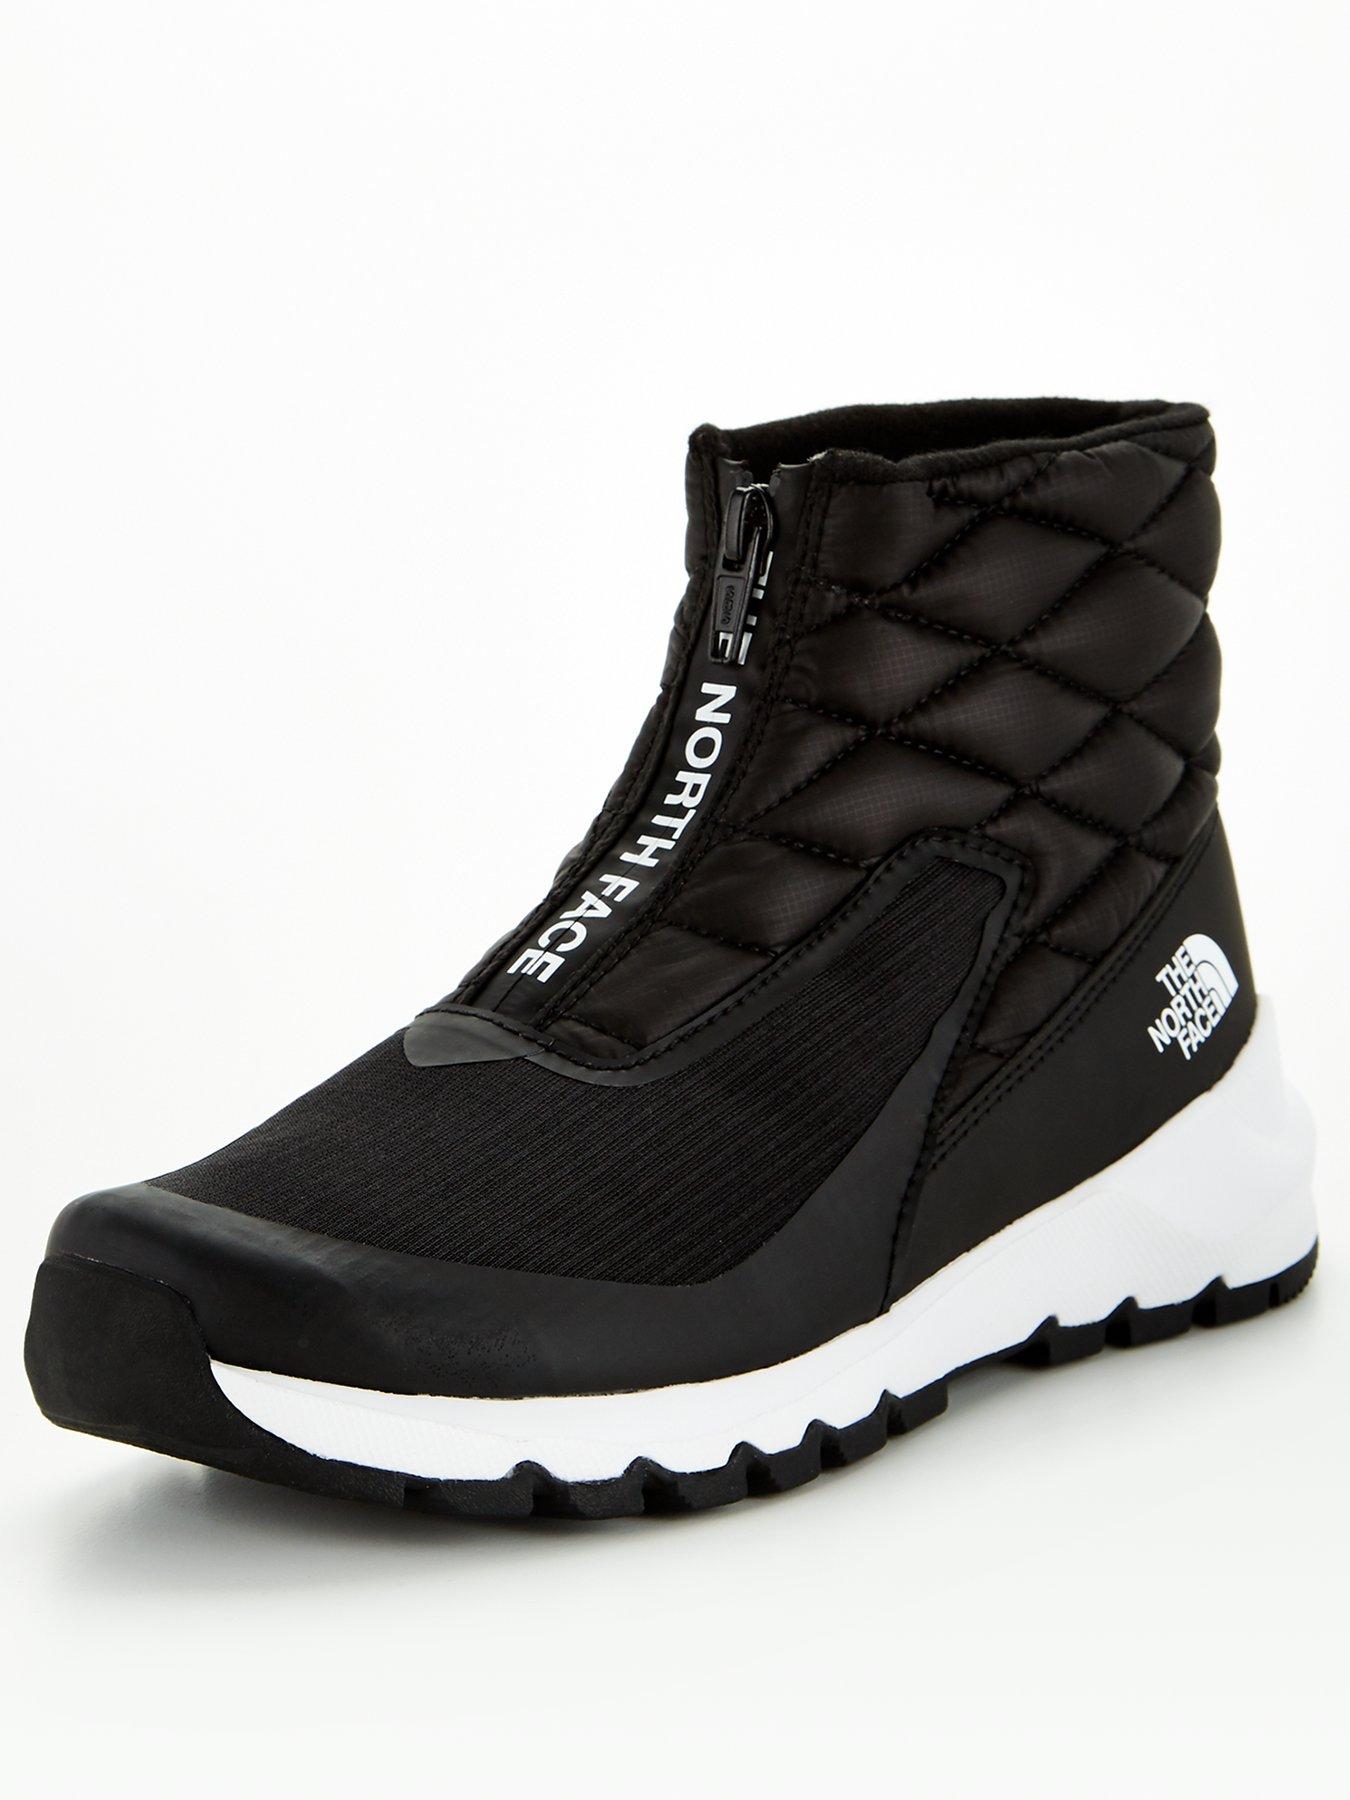 thermoball boots north face